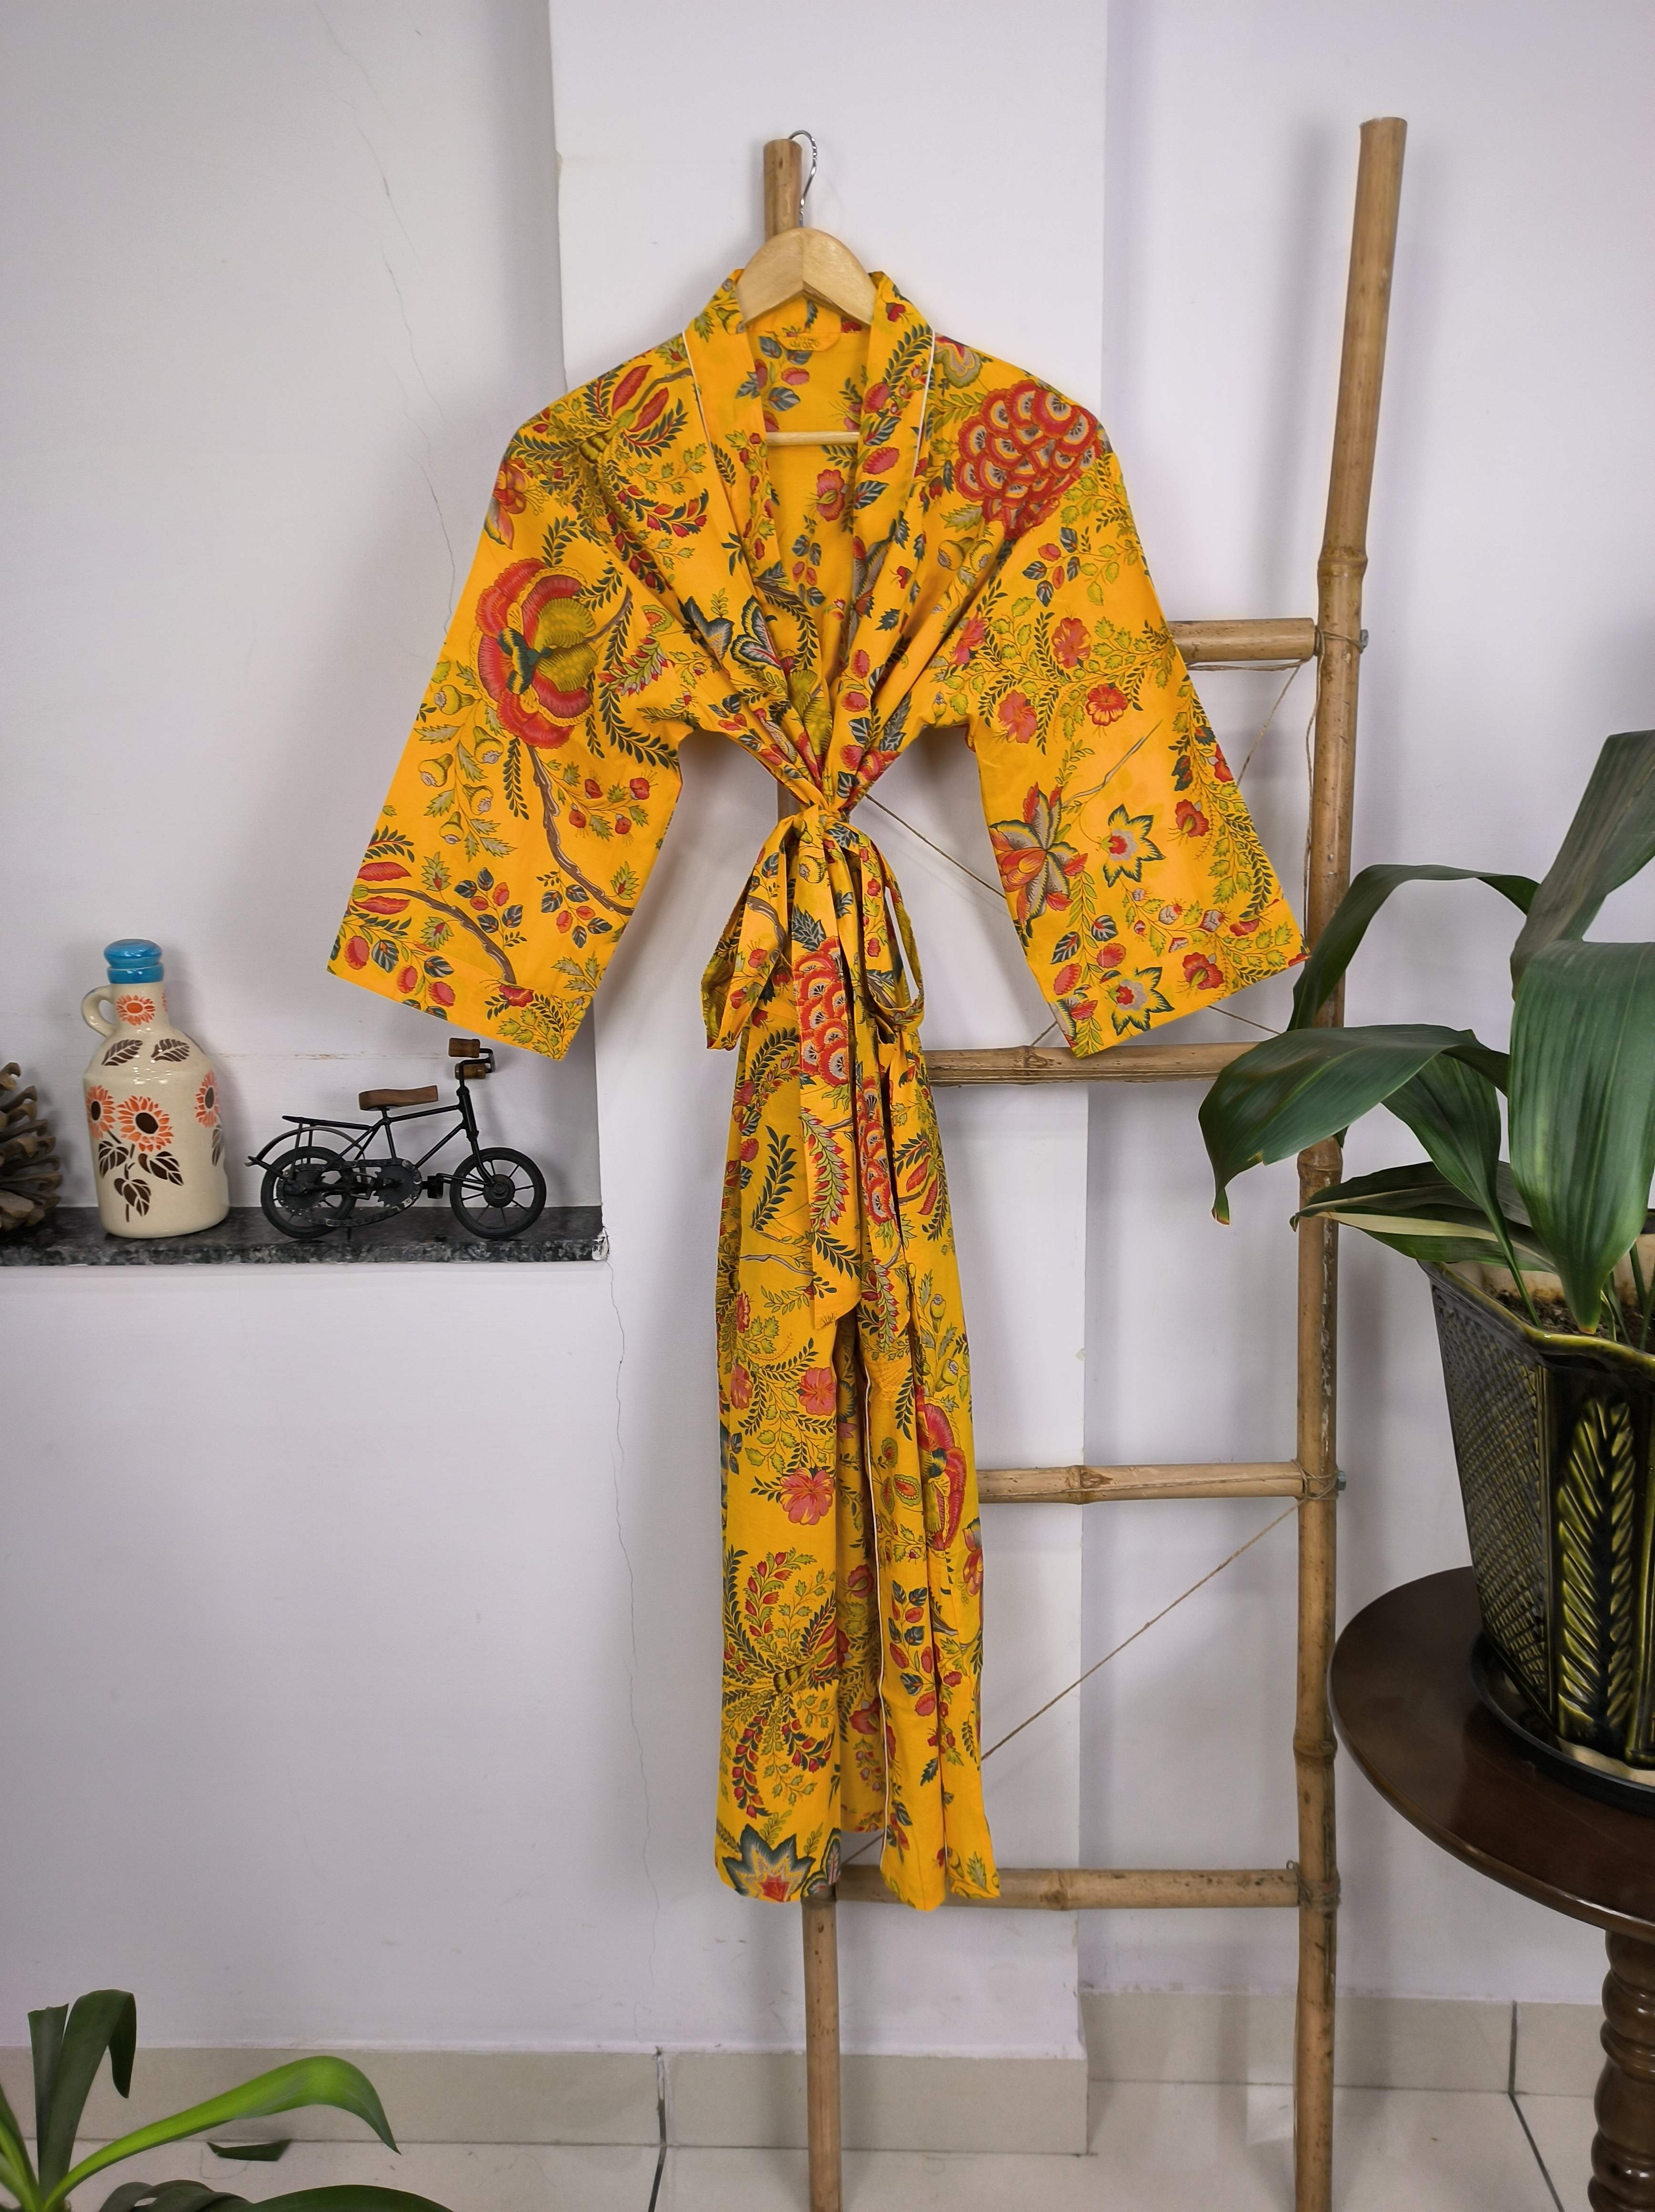 Pure Cotton Kimono Indian Handprinted Boho House Robe Summer Dress | Yellow Green Red Floral | Beach Cover Up Wear | Christmas Present